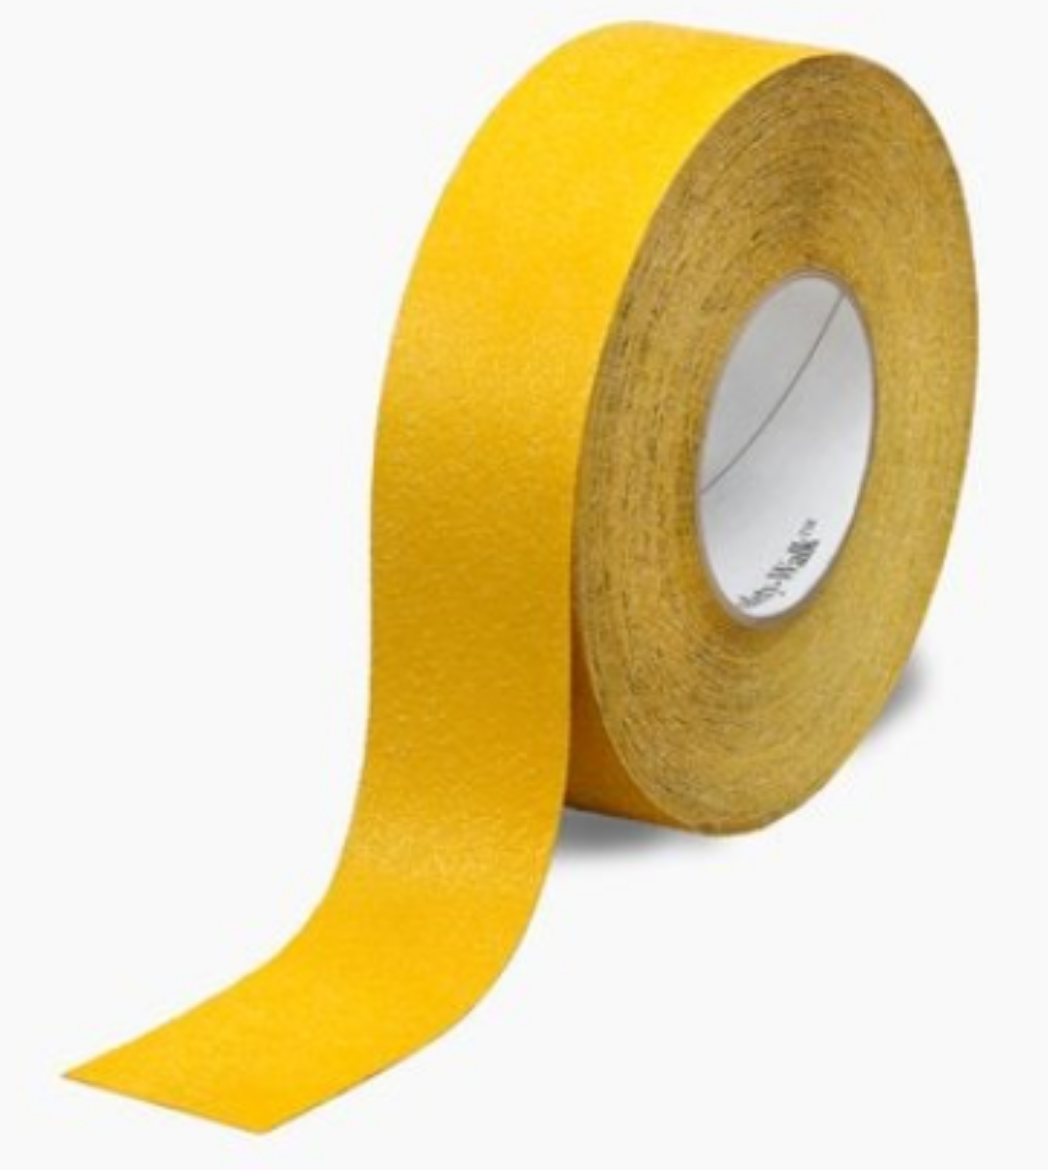 Picture of 3M™ Safety-Walk™ Slip-Resistant Conformable Tapes and Treads 530, Safety Yellow, 100mm x 18.3m